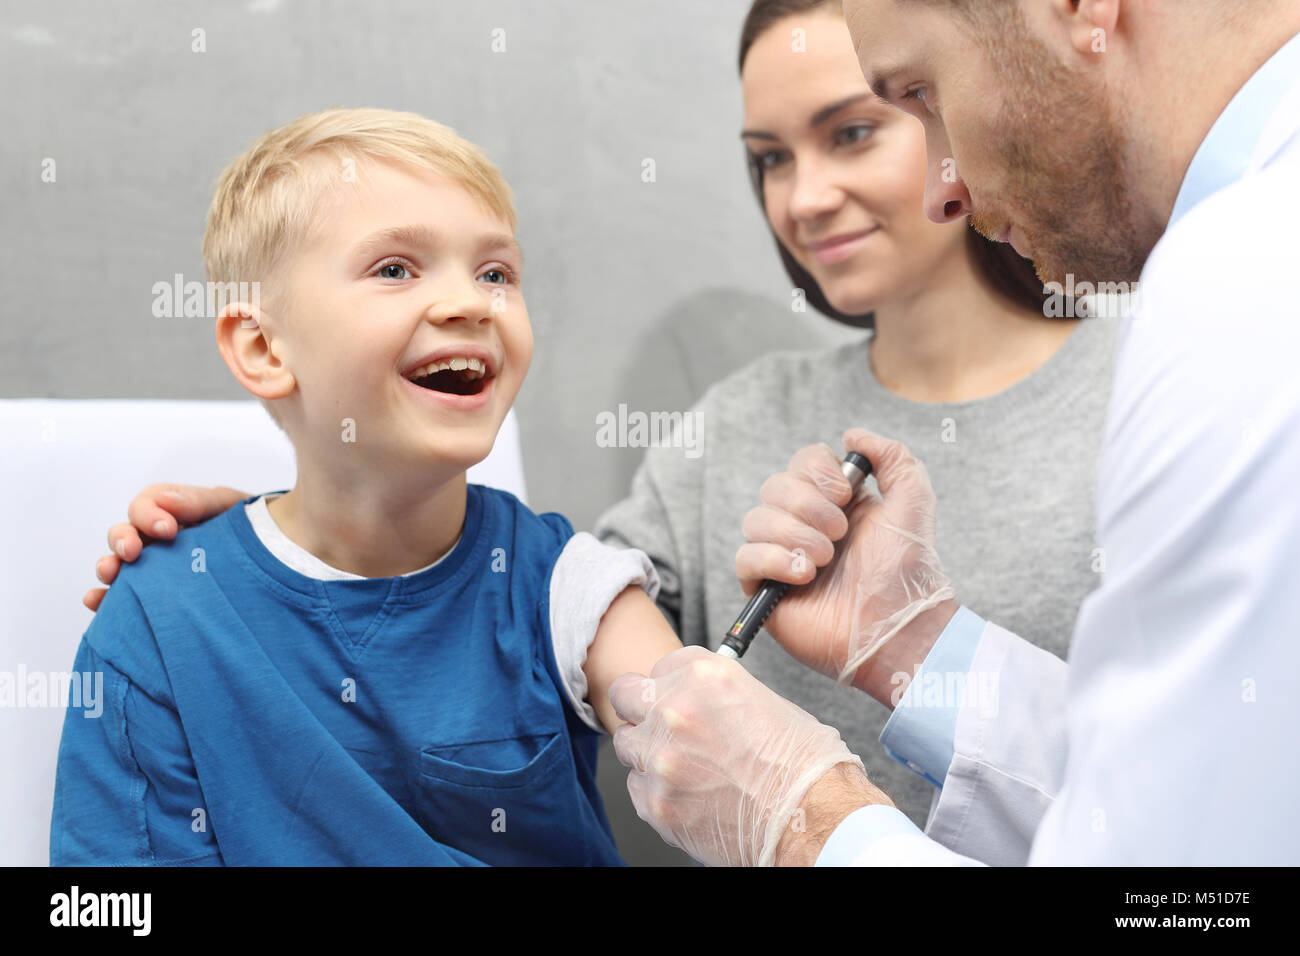 Diabetes in children. A child with diabetes when injecting insulin Stock Photo